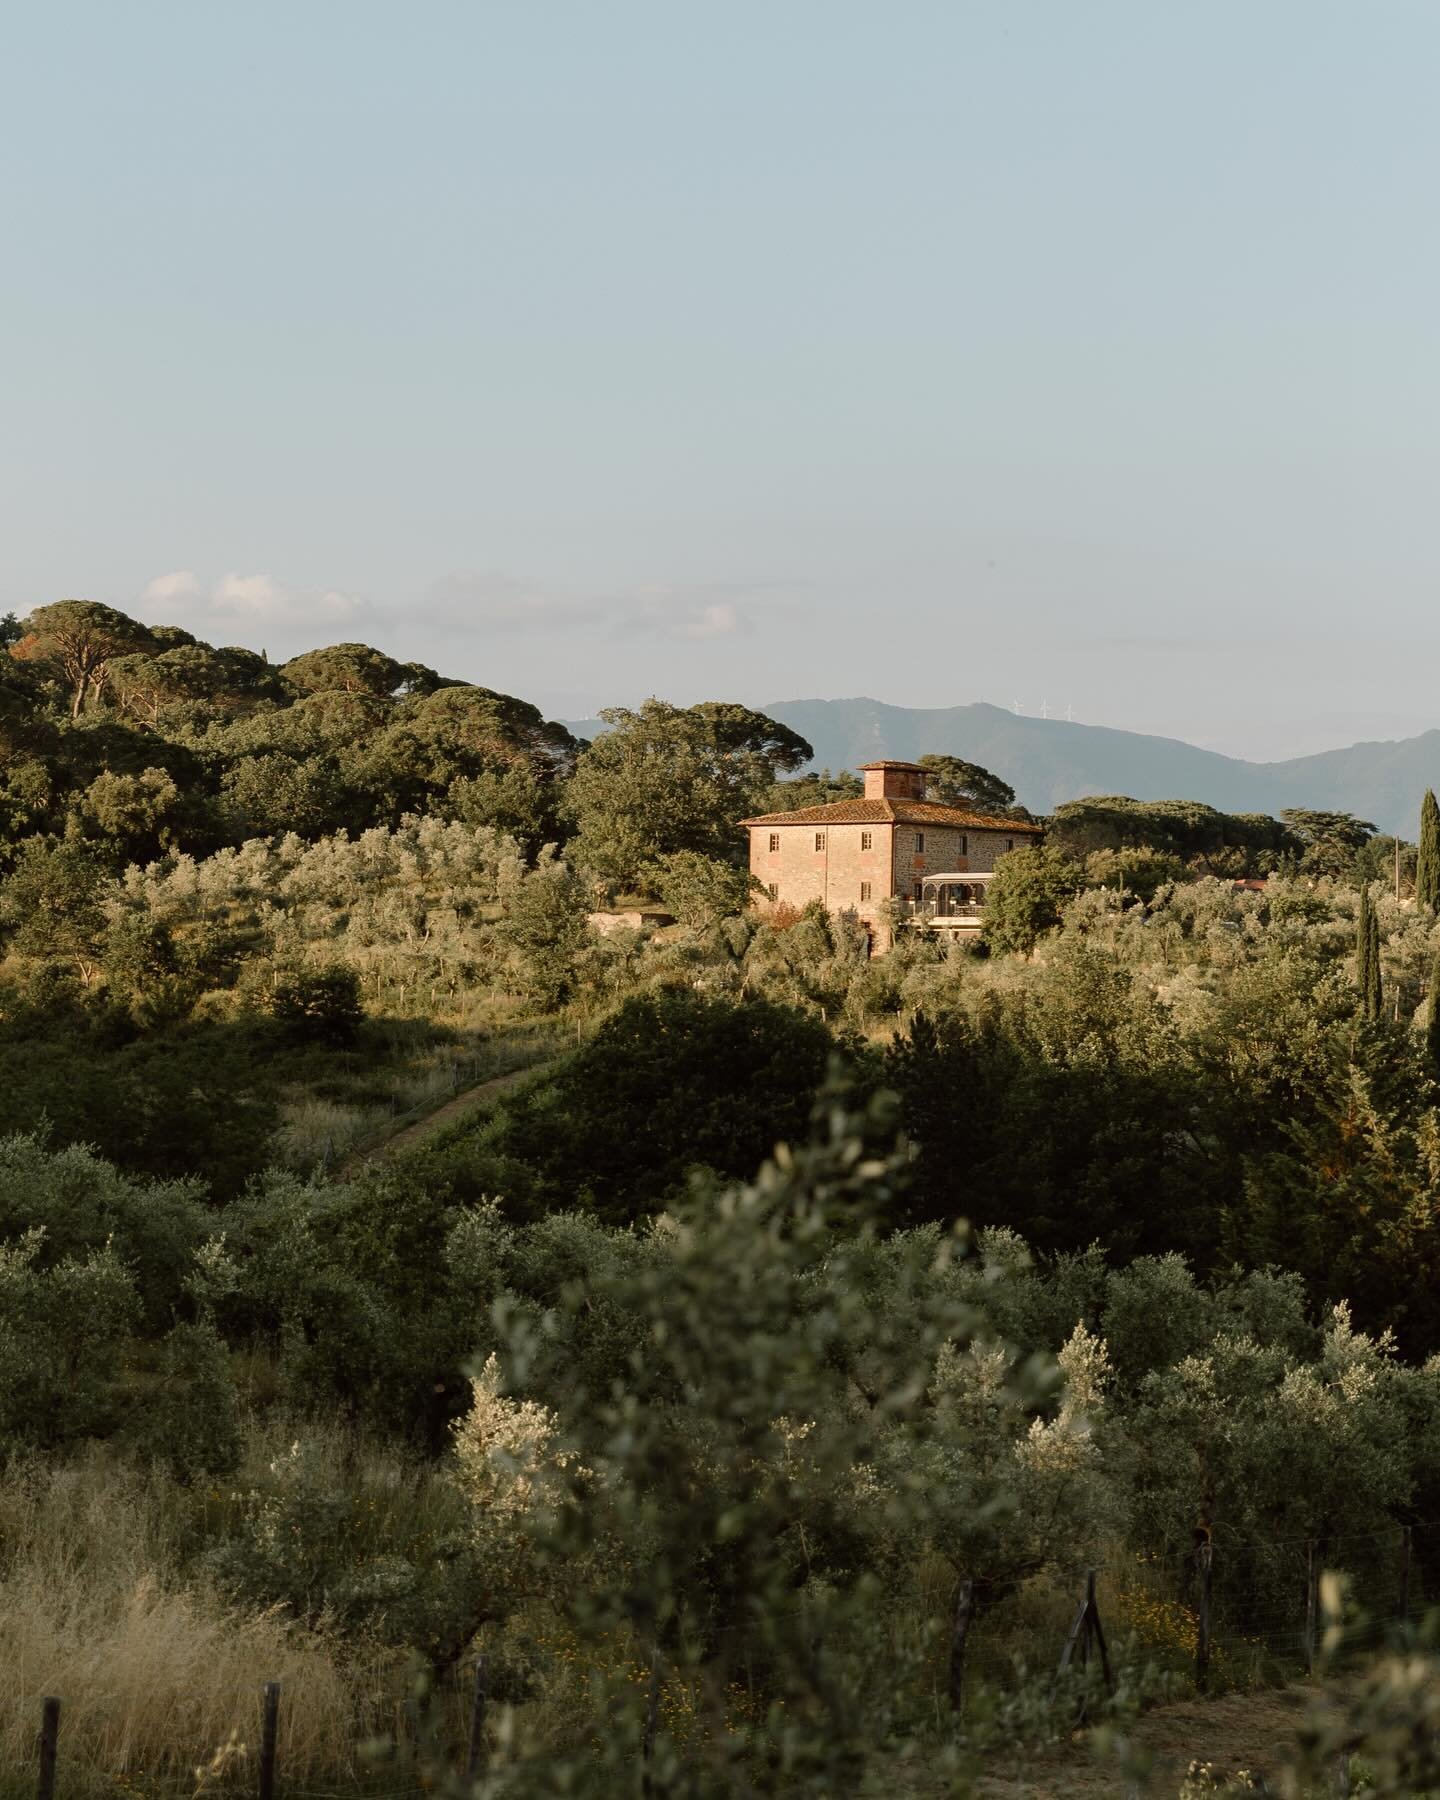 imagine sharing your vows here&mdash; overlooking the rolling hills, followed by dinner tucked away in the olive groves with your closest friends &amp; family 🥹 🕊️ 

I've been around the world and nothing seams to beat the rolling Tuscan countrysid